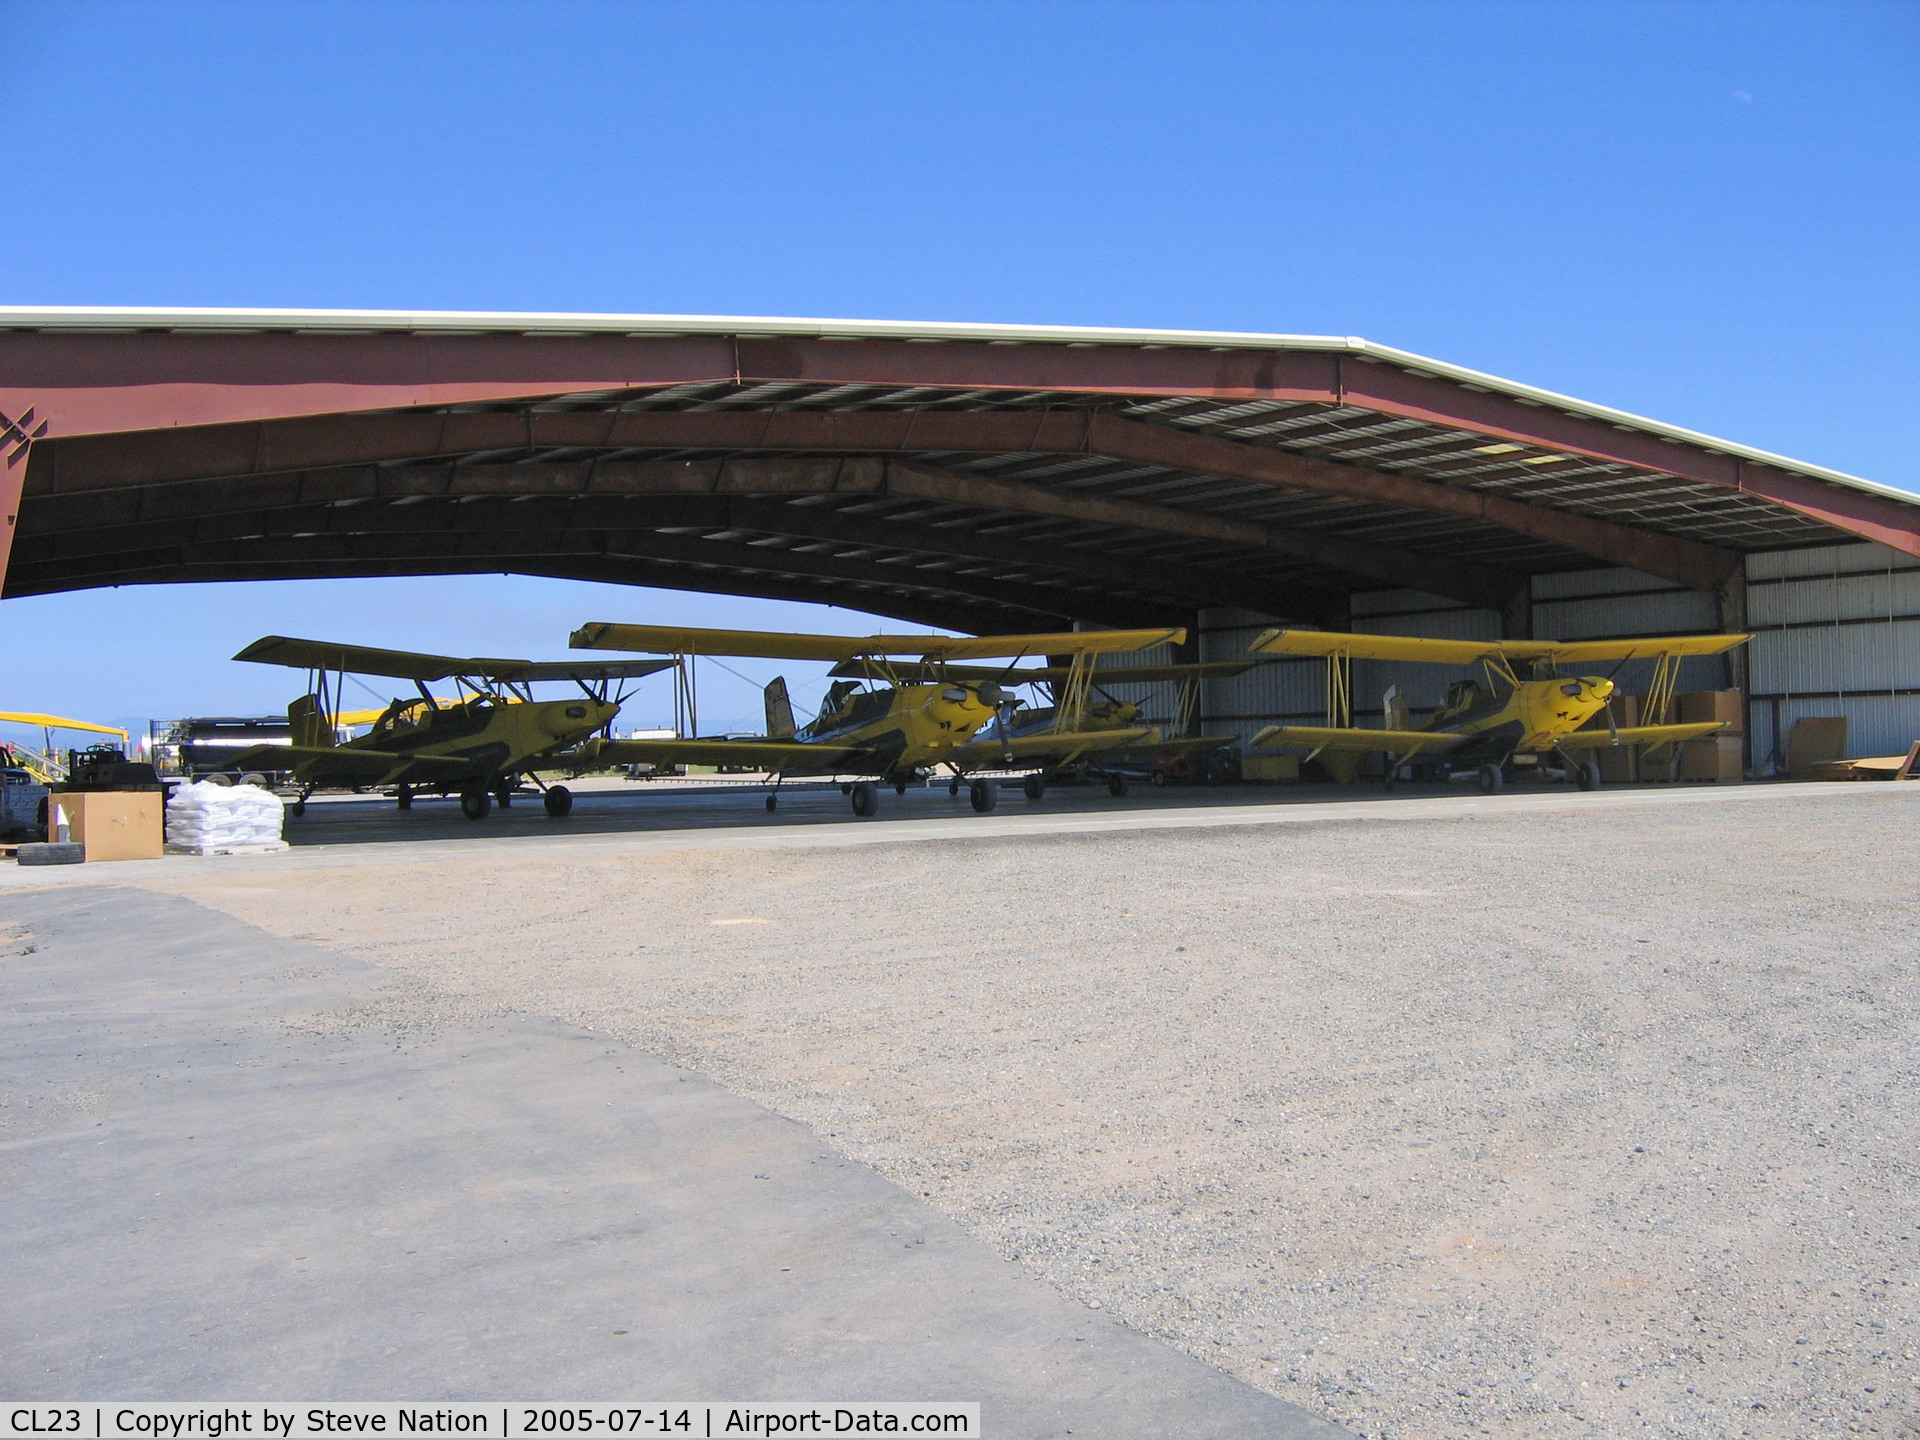 Jones/ag-viation Airport (CL23) - Jones Flying Service/Ag-viation has this magnificent hangar at their Biggs, CA airstrip